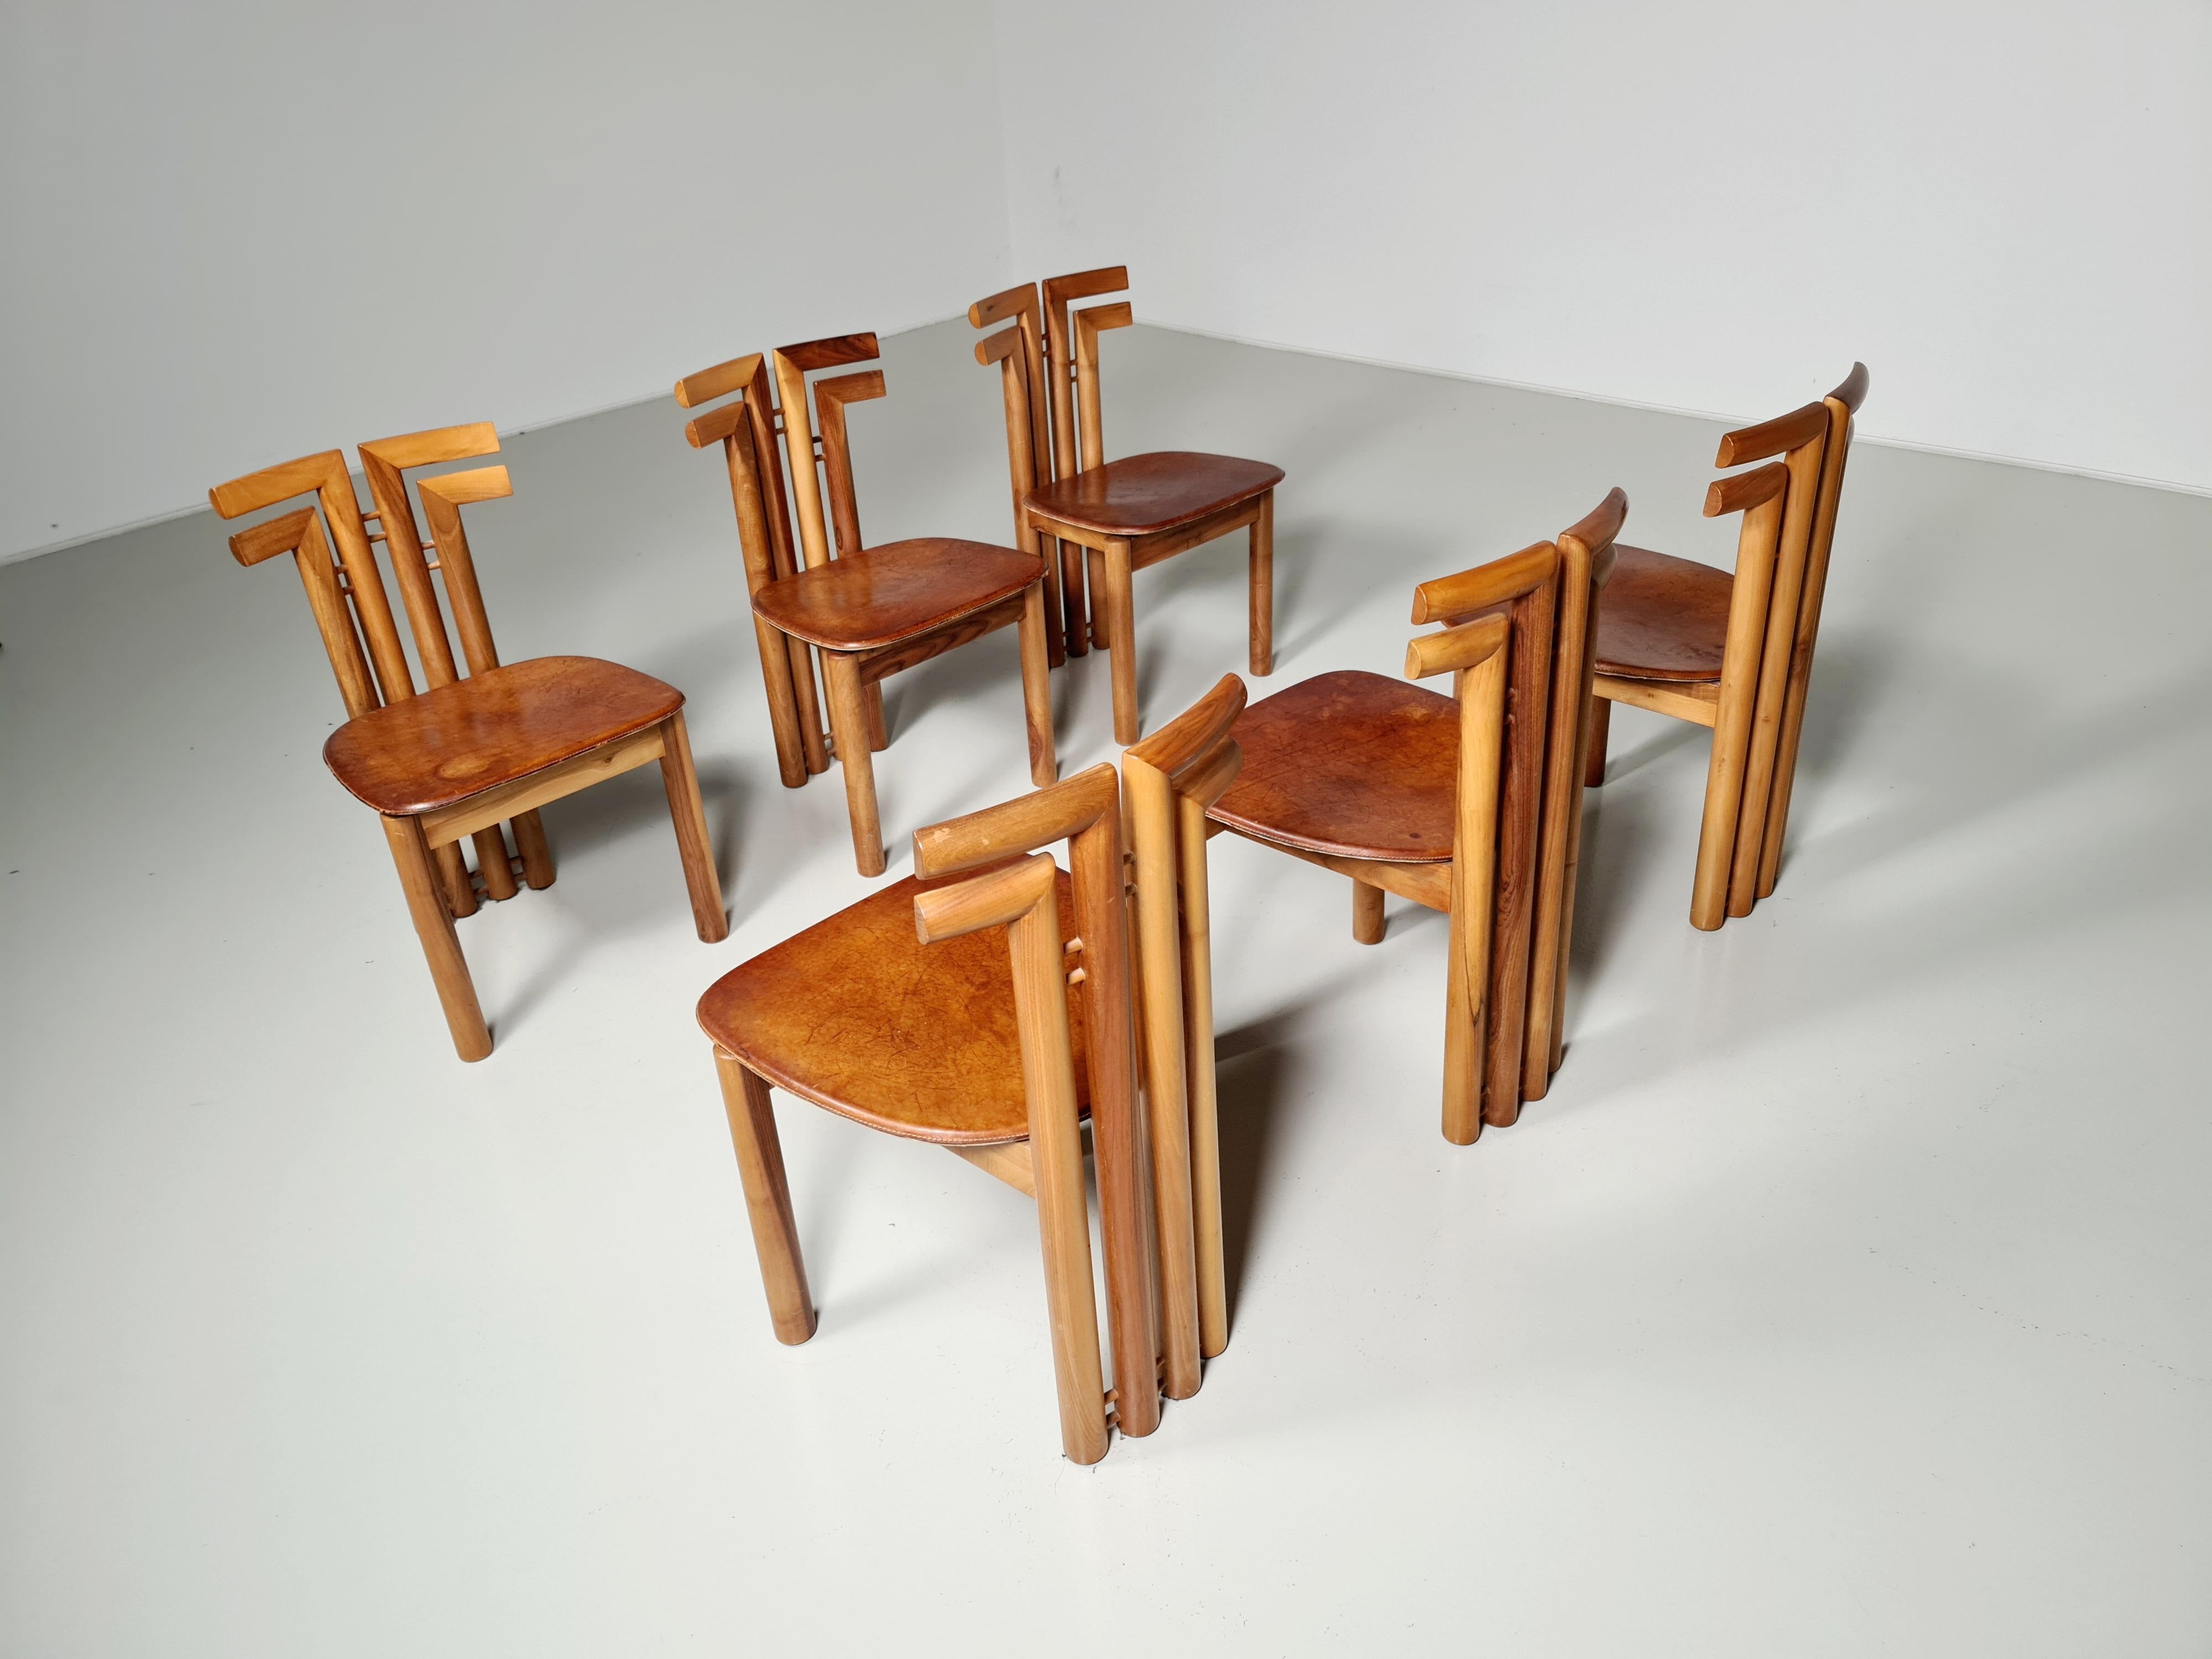 Sapporo for Mobil Girgi, set of six dining chairs, Italian walnut and black leather, Italy, 1970s. Sculptural chairs by Sapporo Mobilgirgi that feature wonderful backrests. The color of the Italian walnut frame is deep and warm which accompanies the